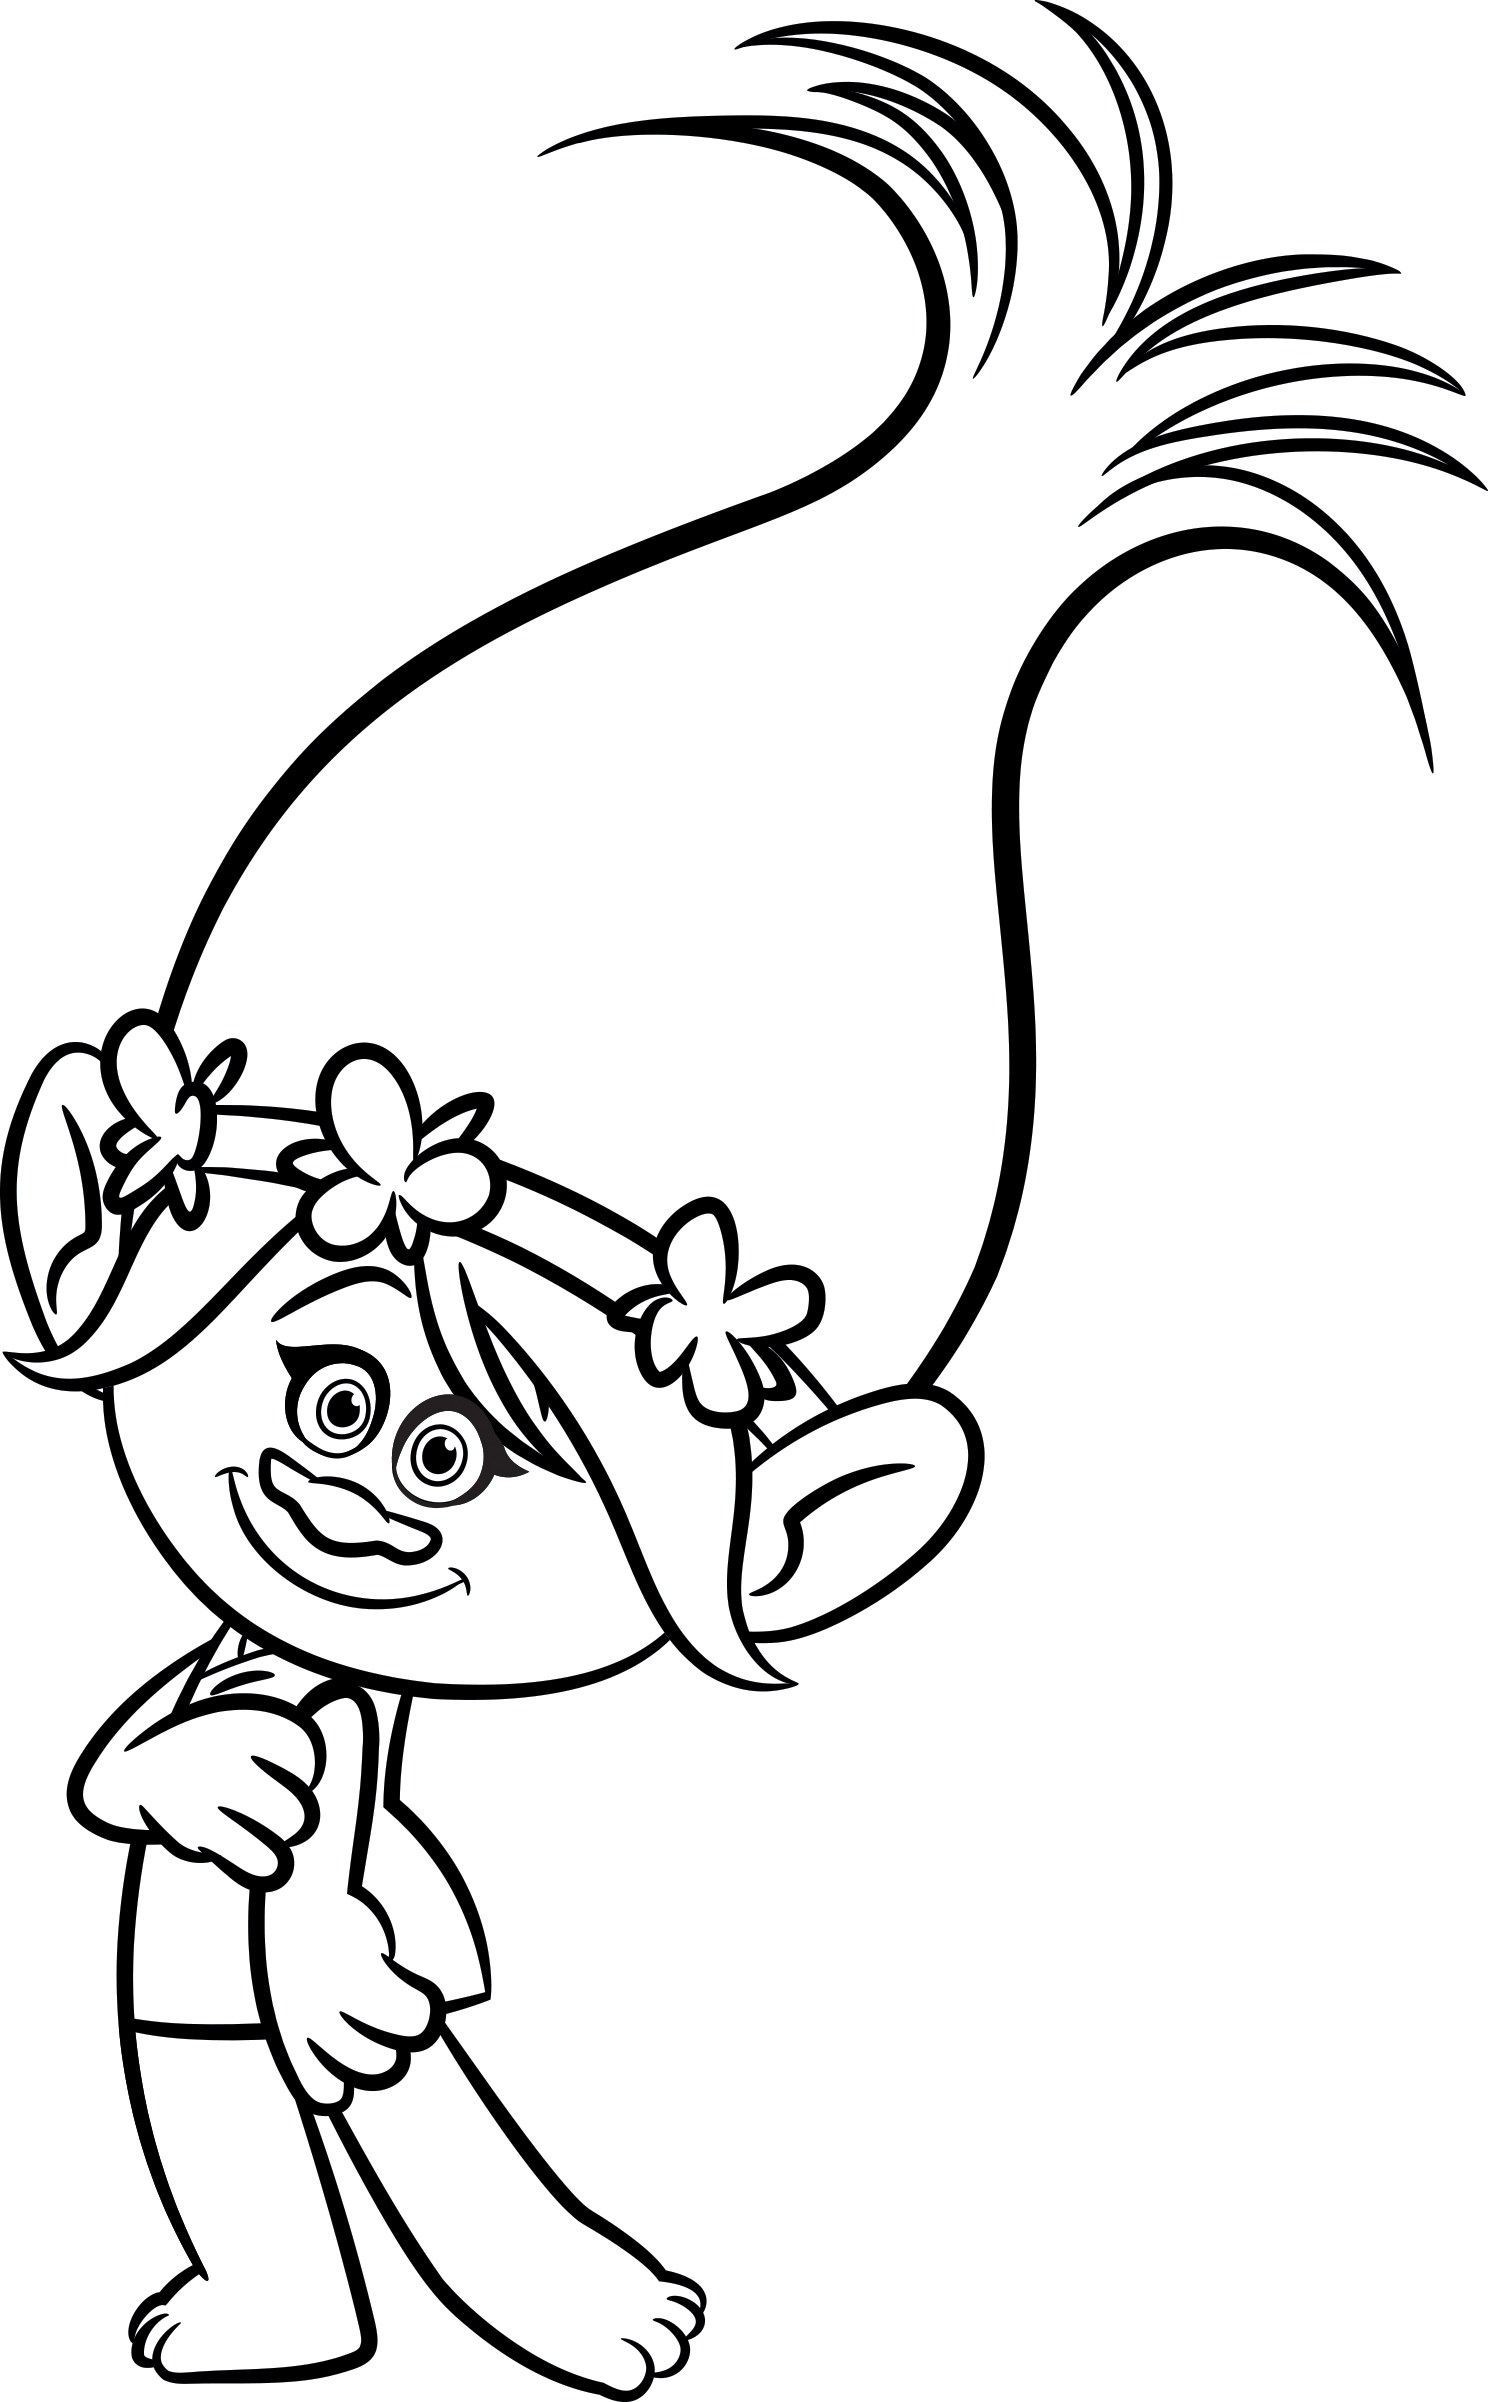 Coloring Pages Of Princess Poppy Wallpaper